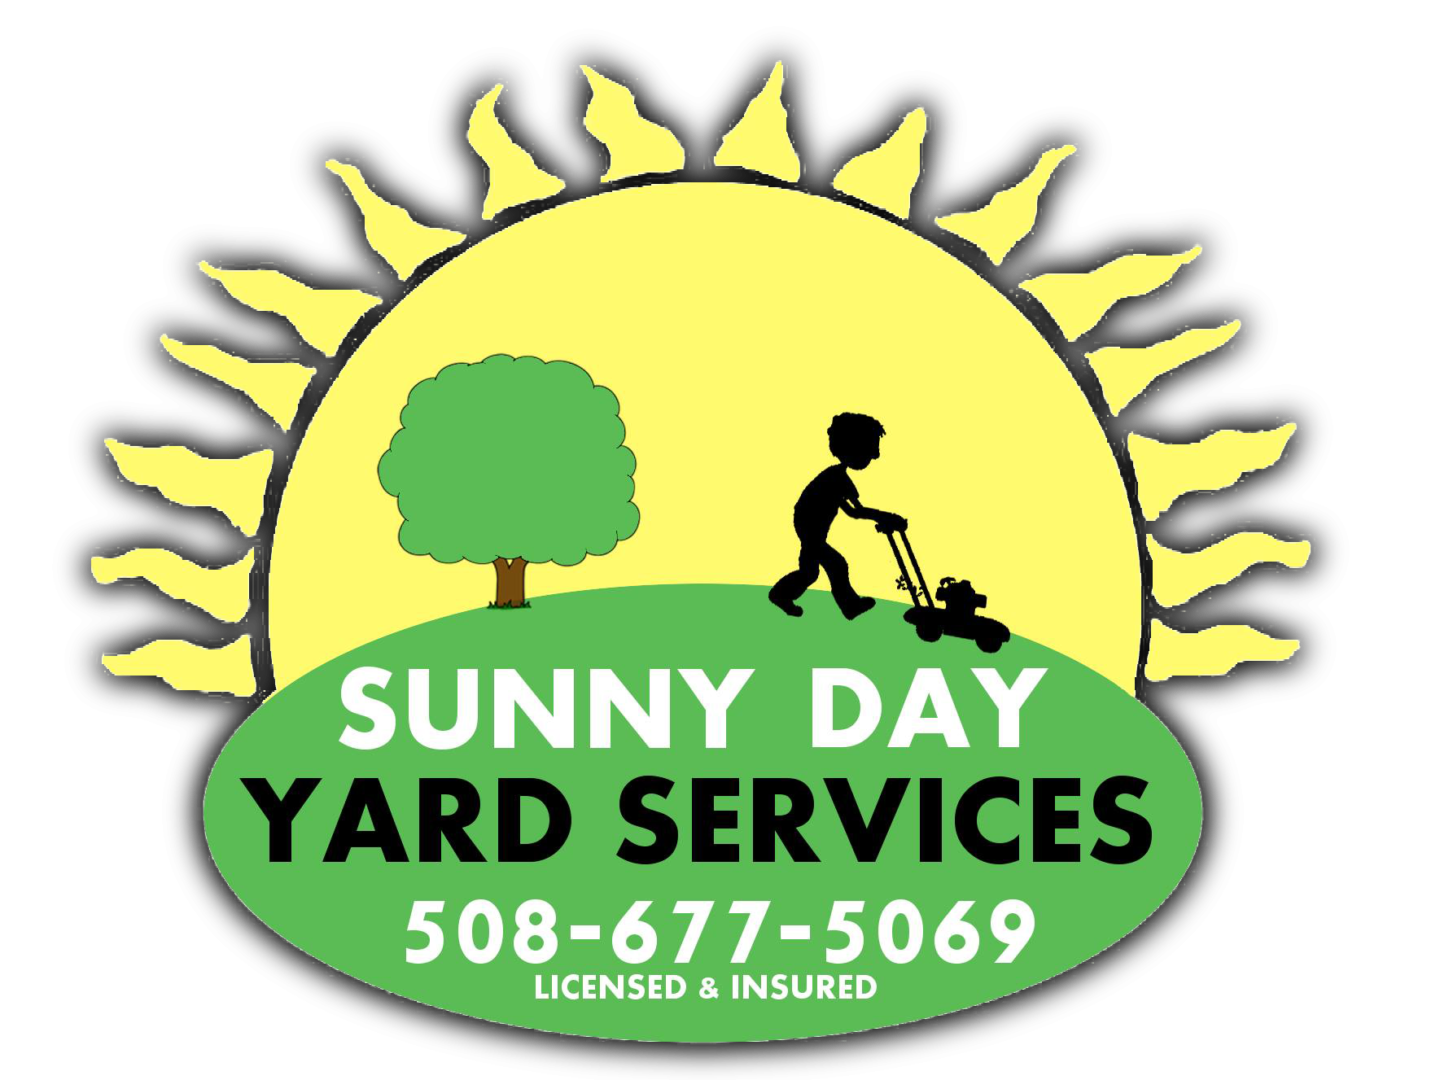 Sunny Day Yard Services